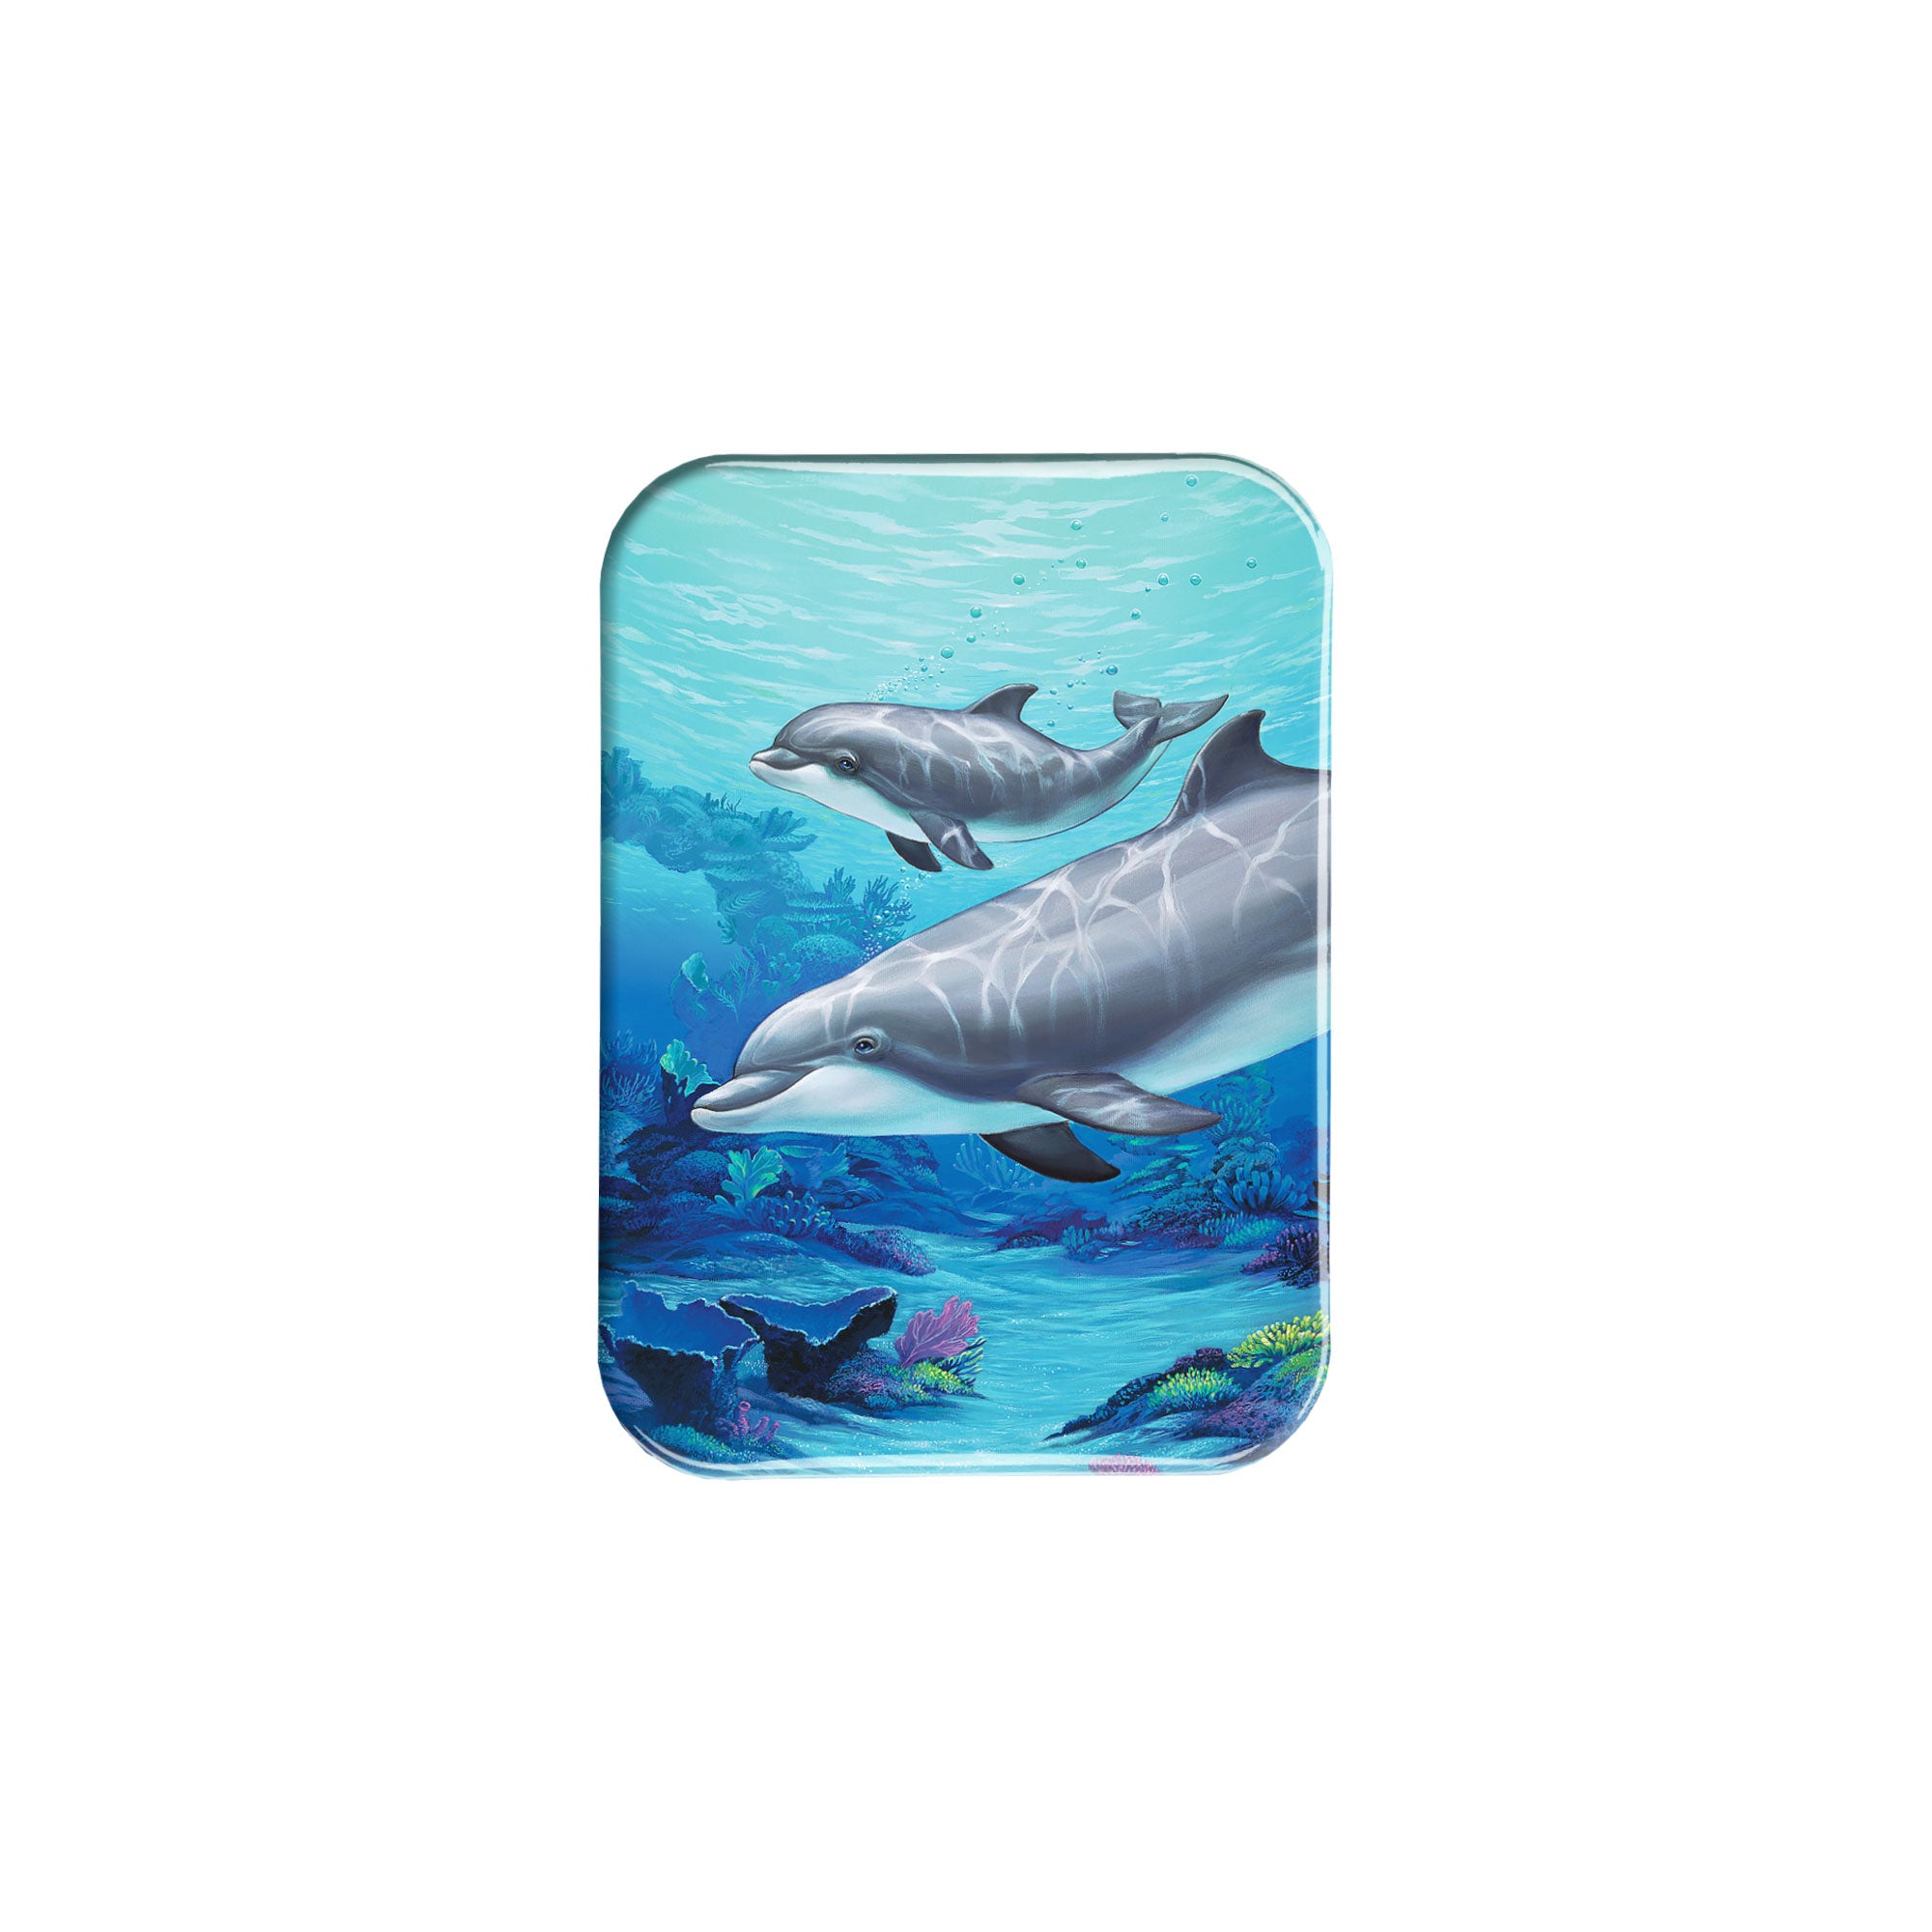 "Dolphin And Baby" - 2.5" X 3.5" Rectangle Fridge Magnets